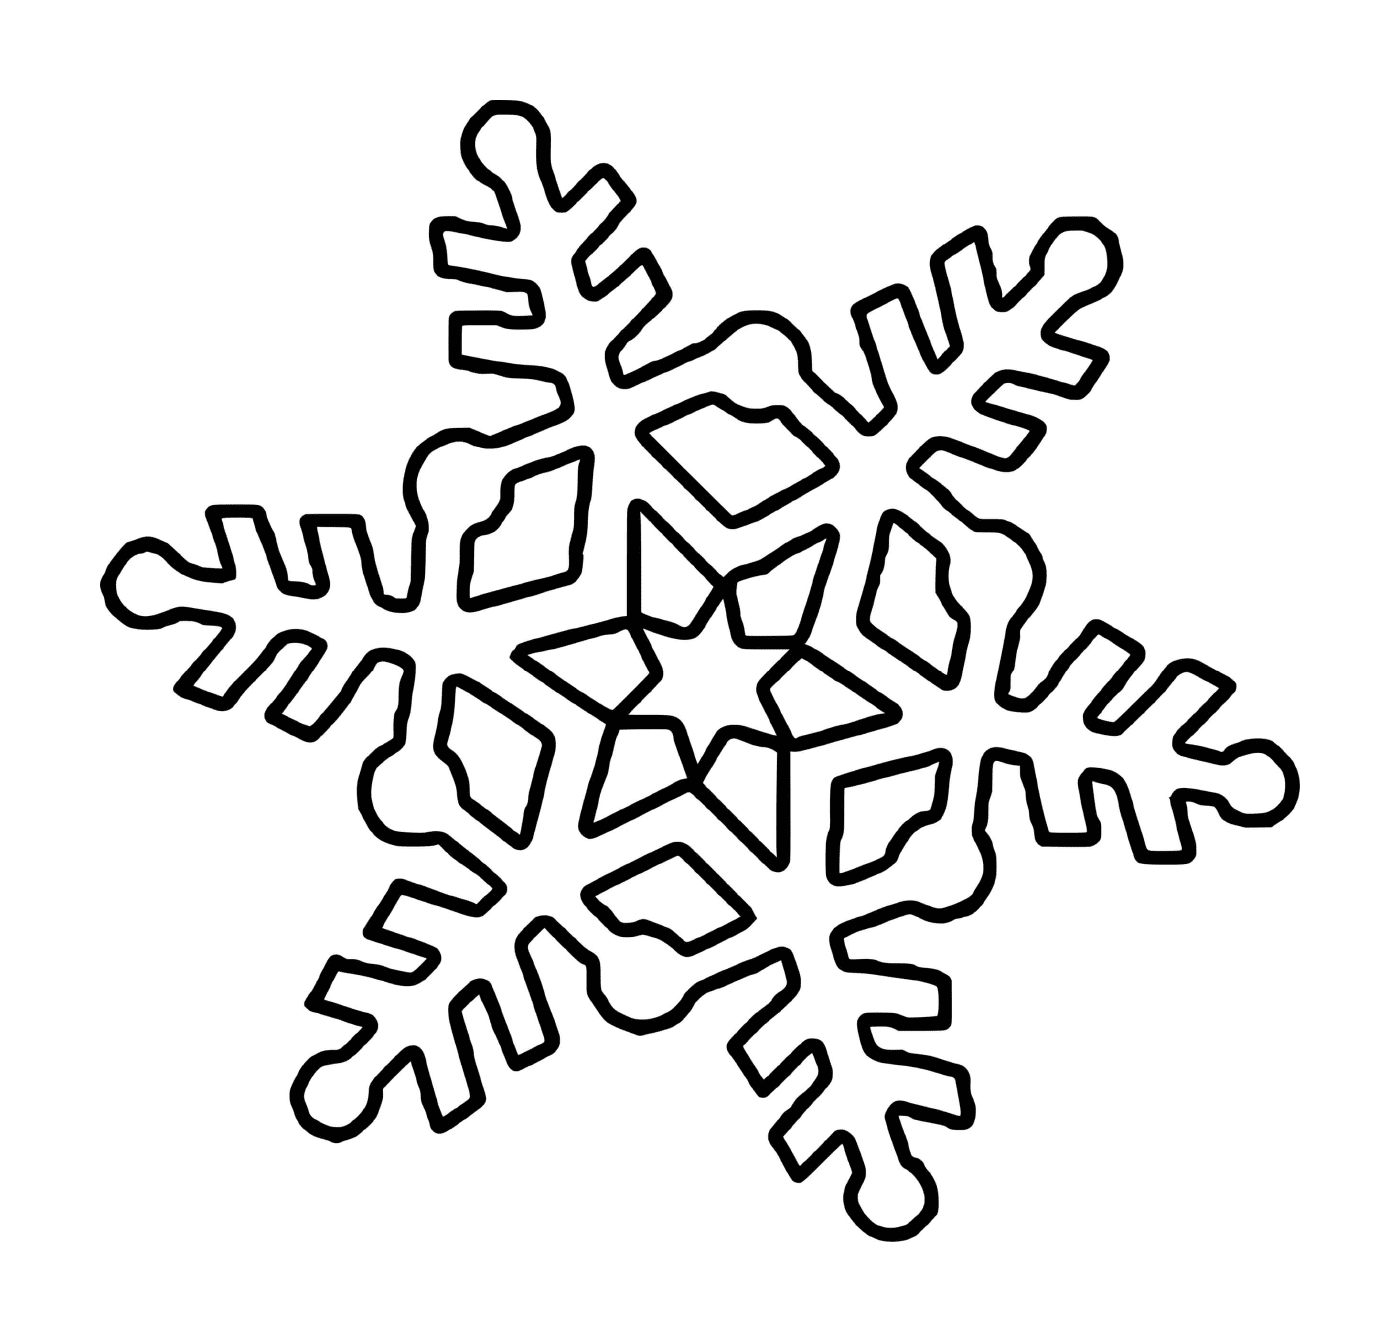  A hexagonal snowflake with a star 